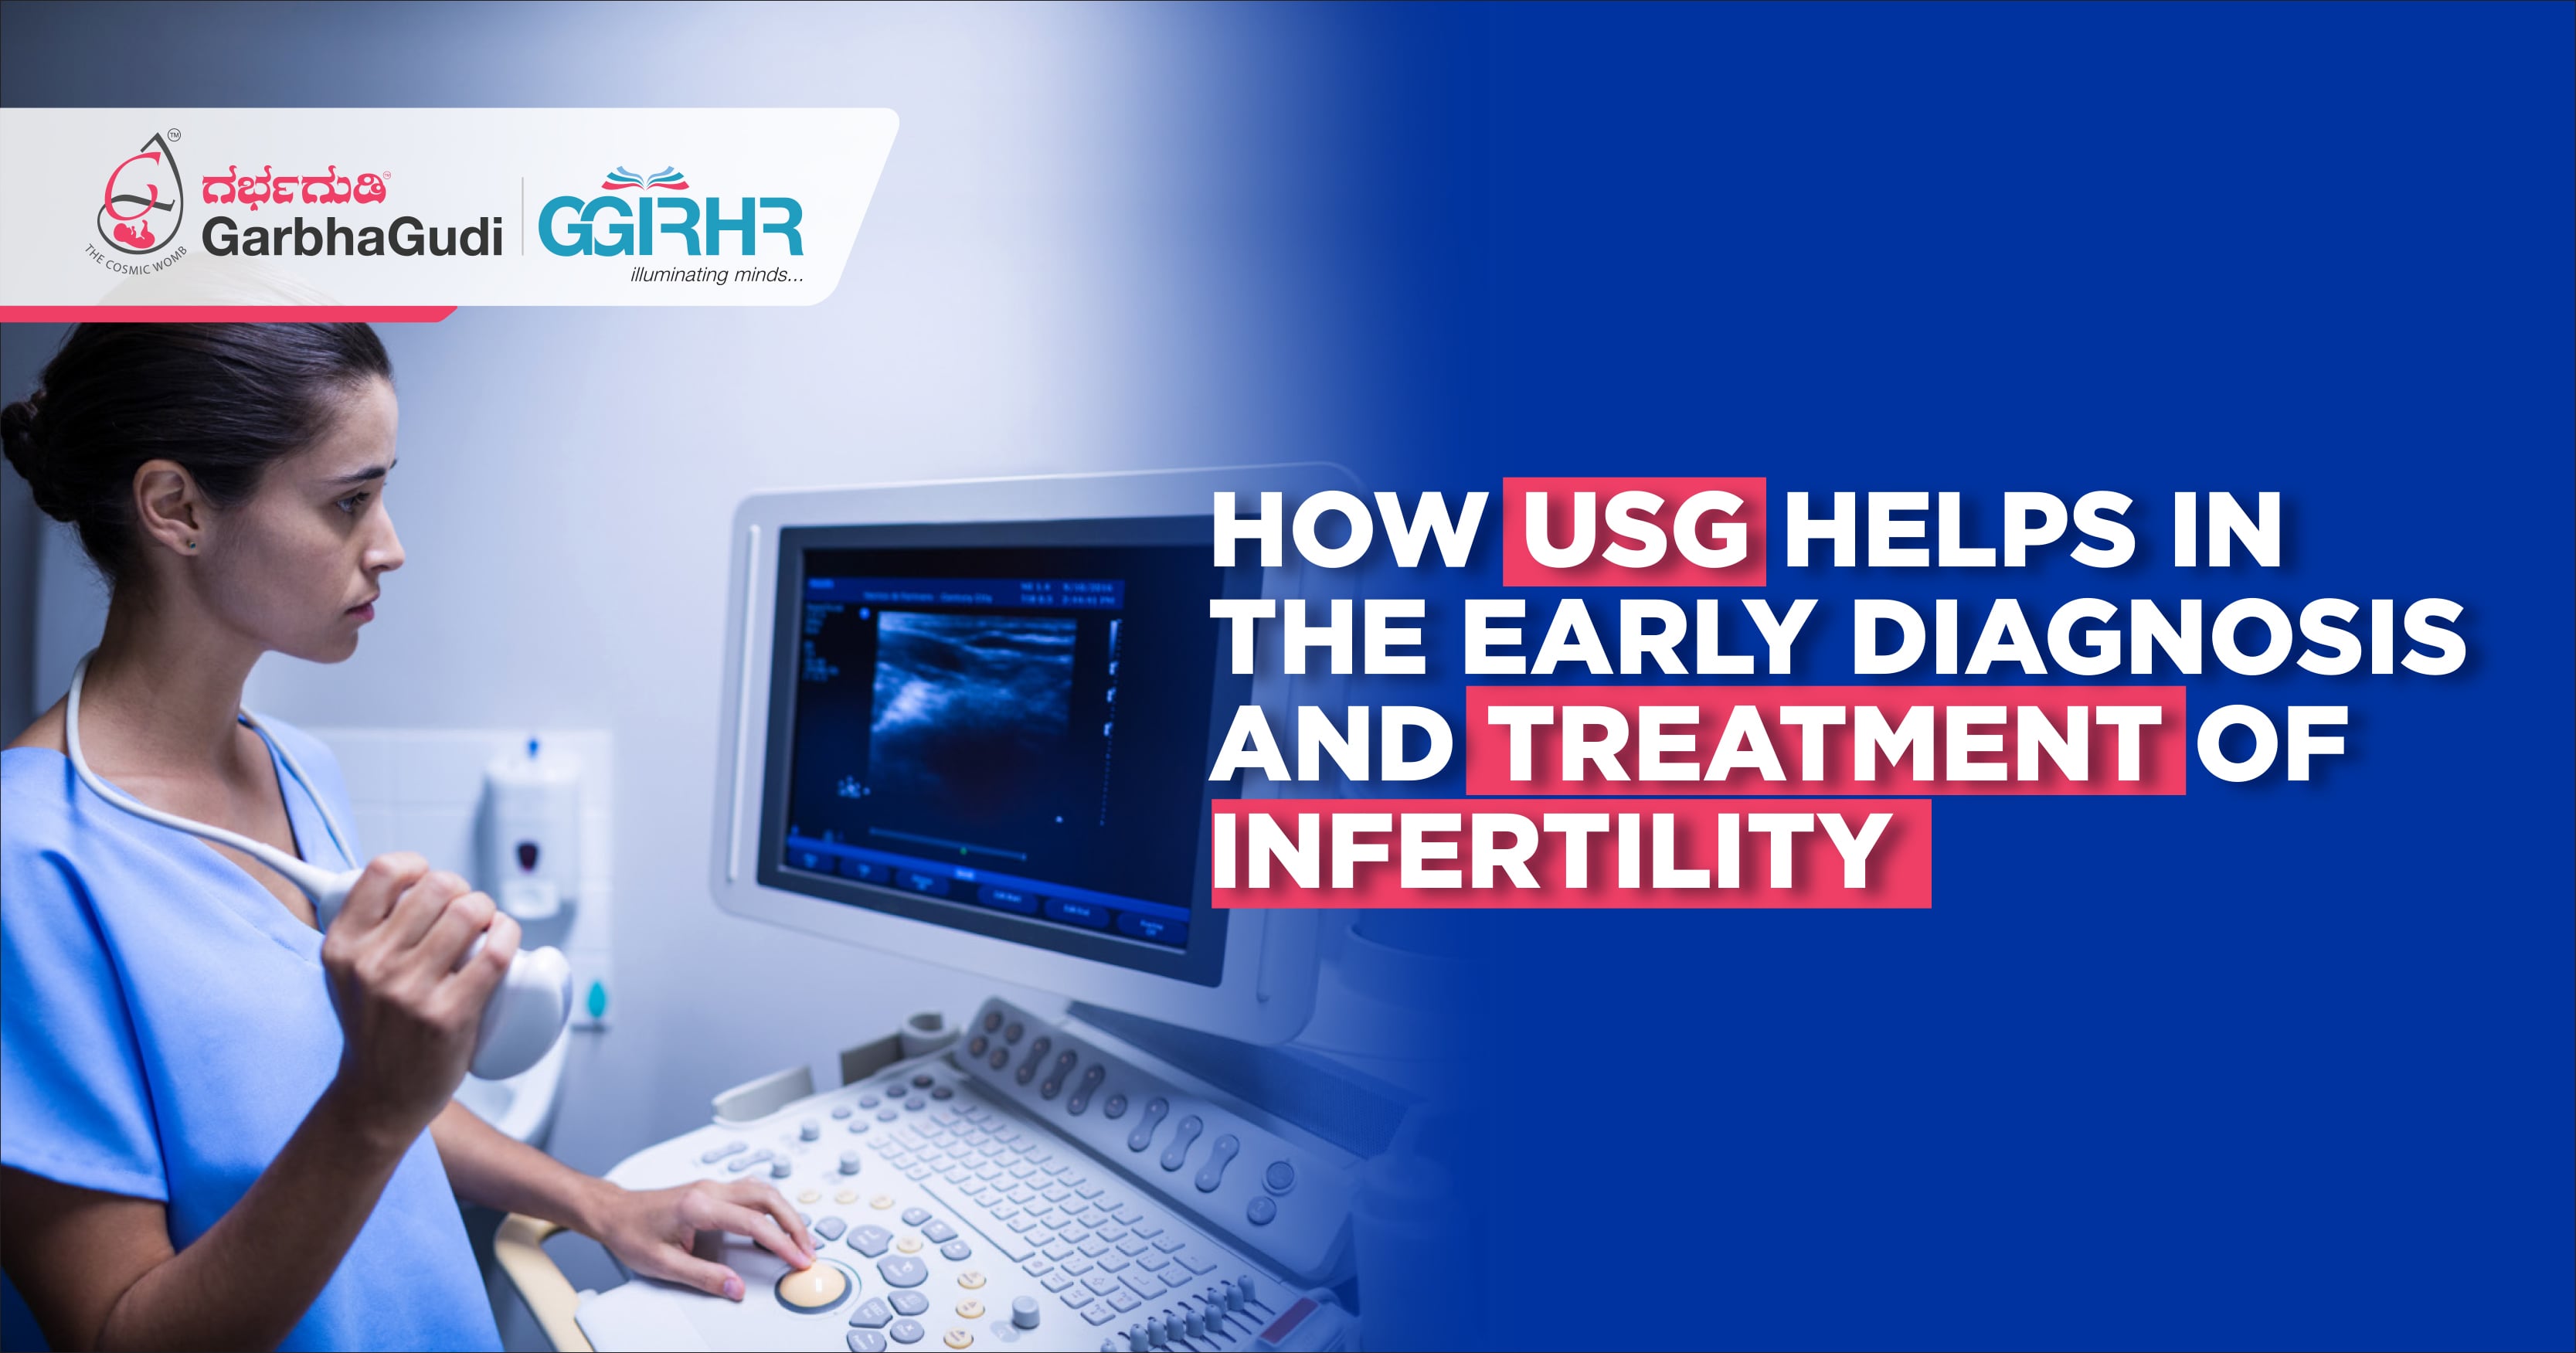 How USG Helps in the Early Diagnosis and Treatment of Infertility